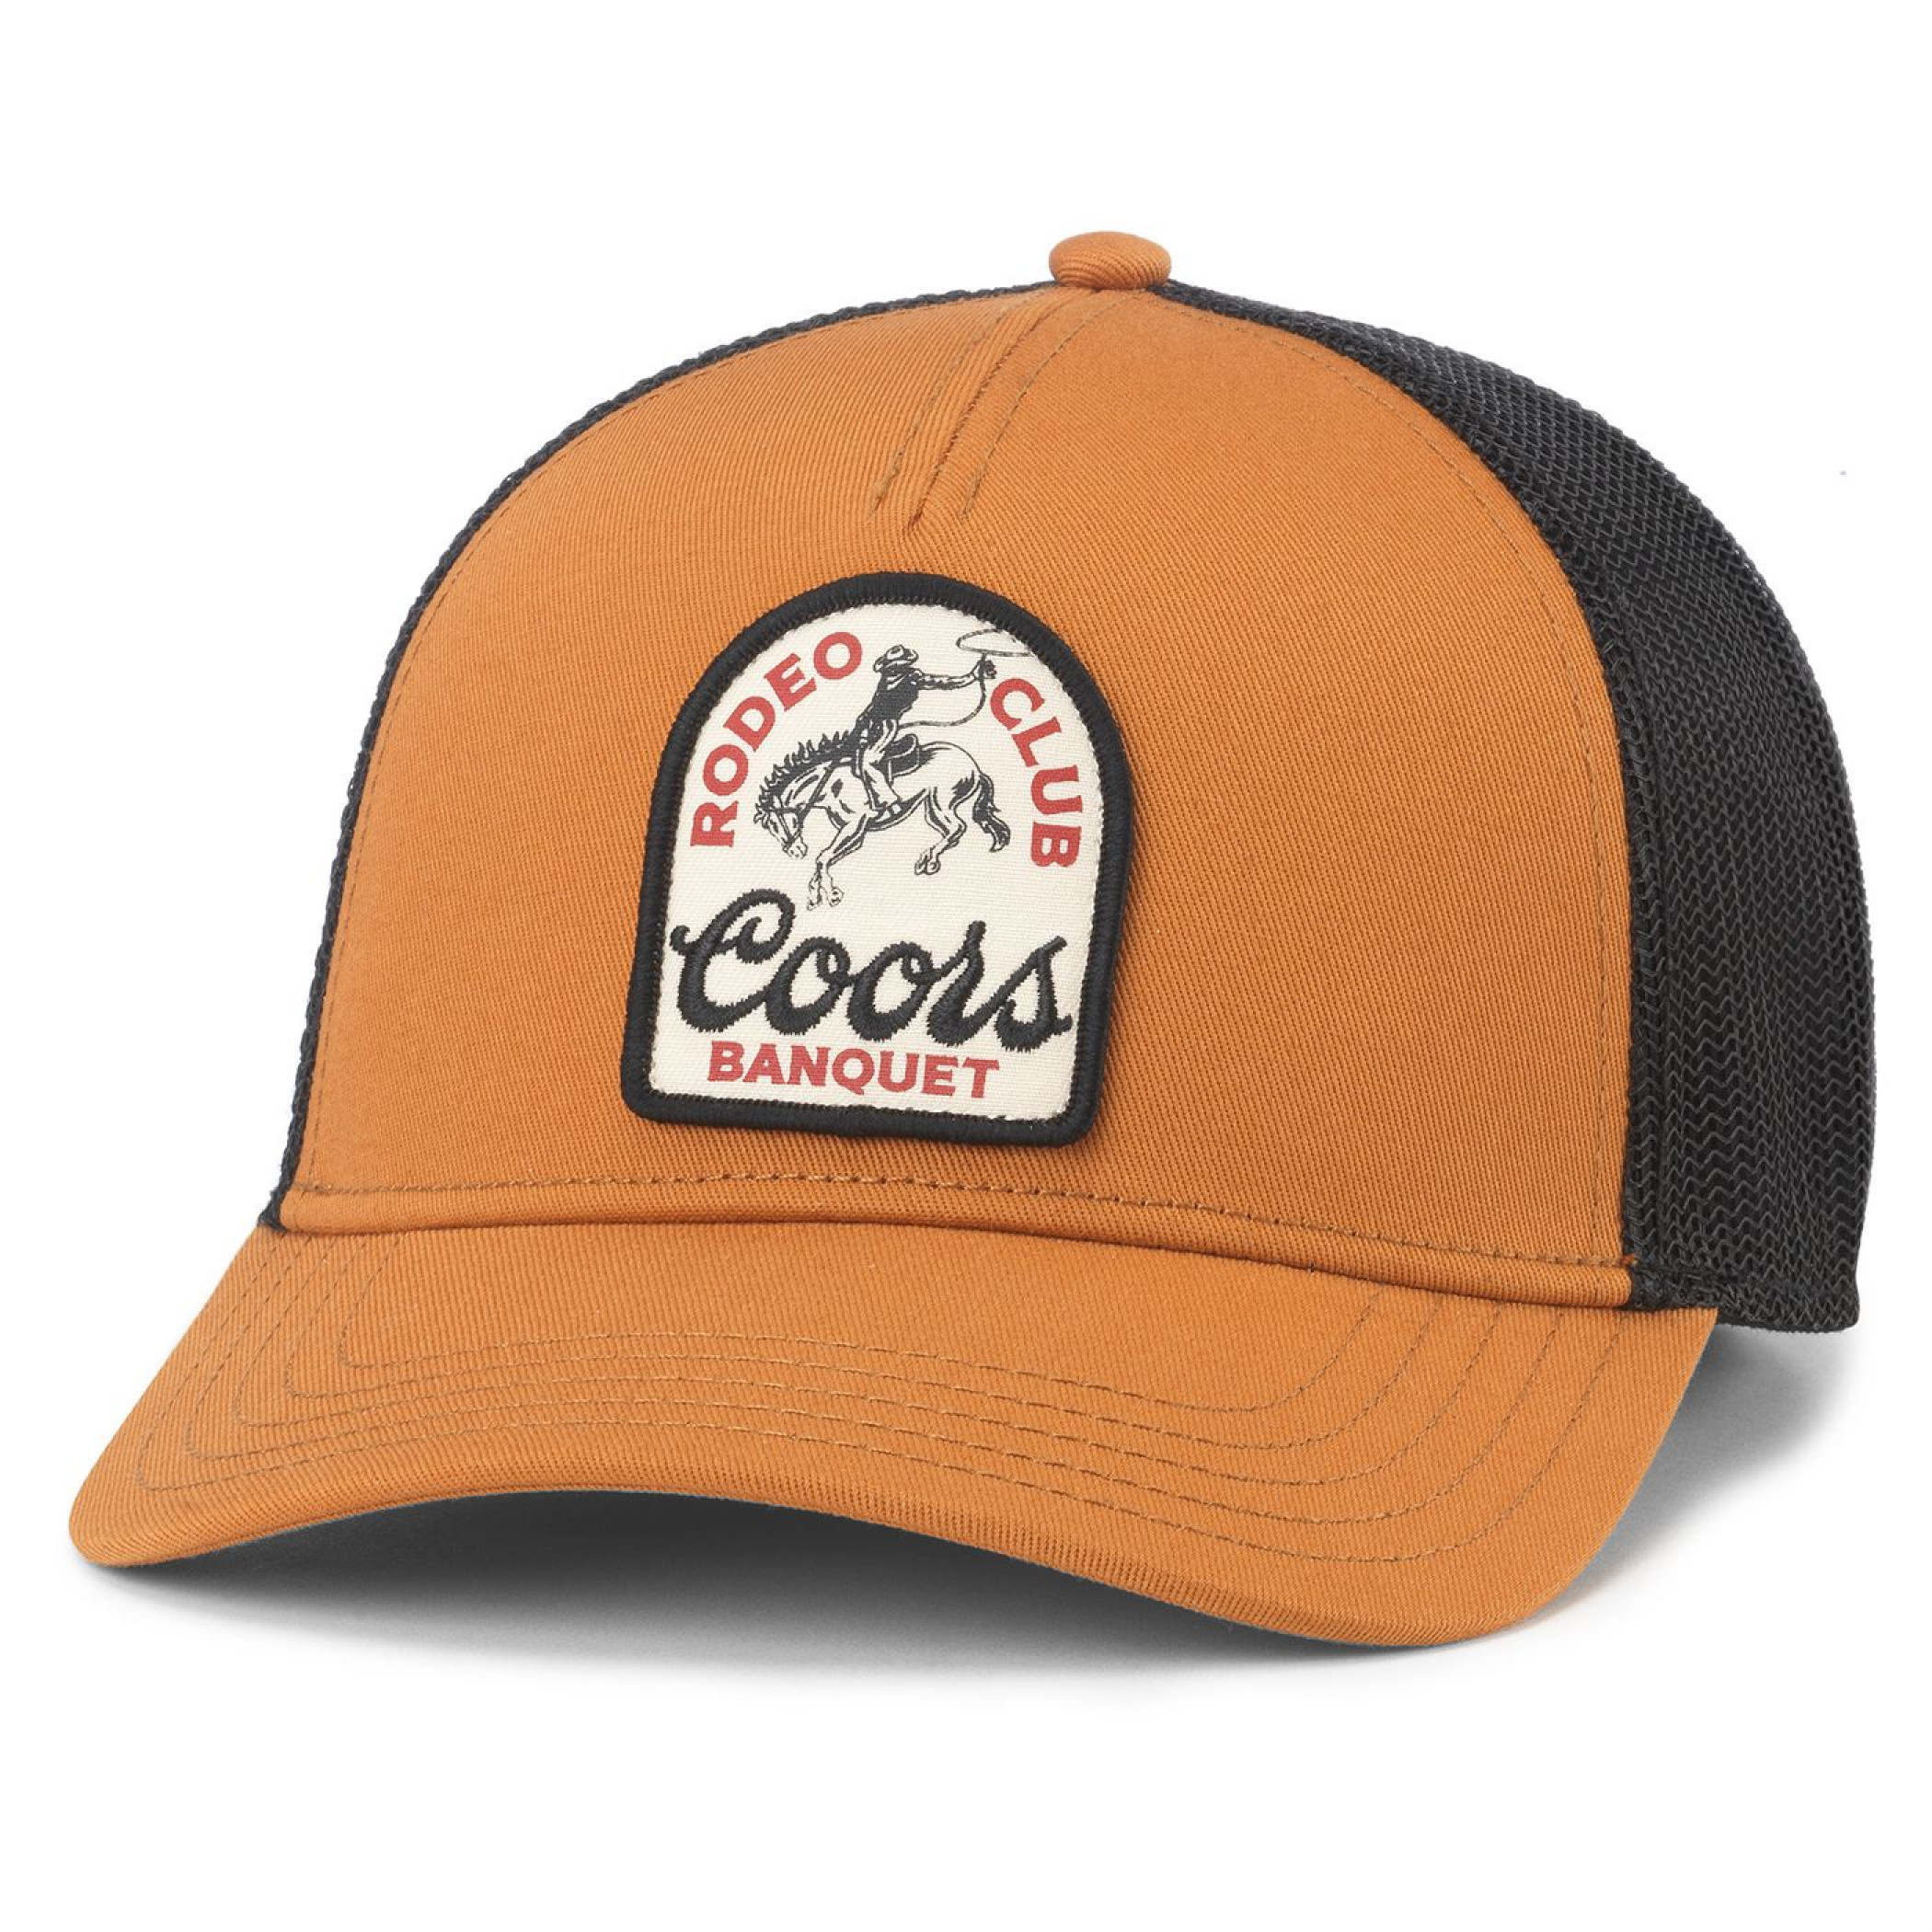 Coors Banquet Rodeo Club Patch Adjustable Snapback Hat